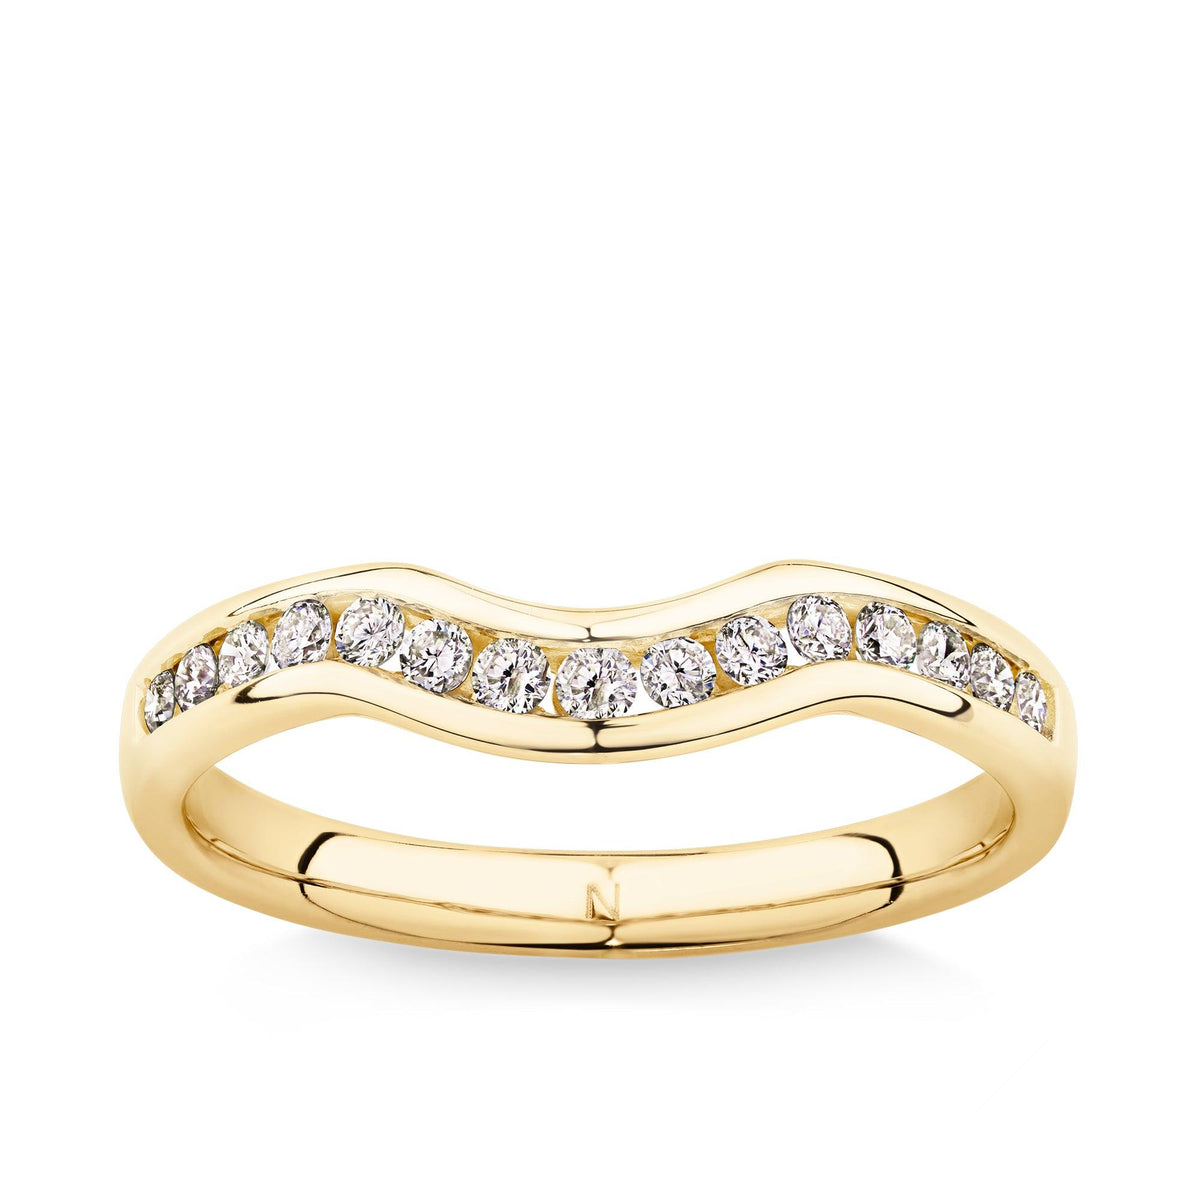 0.25ct TW Diamond Contour Wedding Band in 18ct Yellow Gold - Wallace Bishop